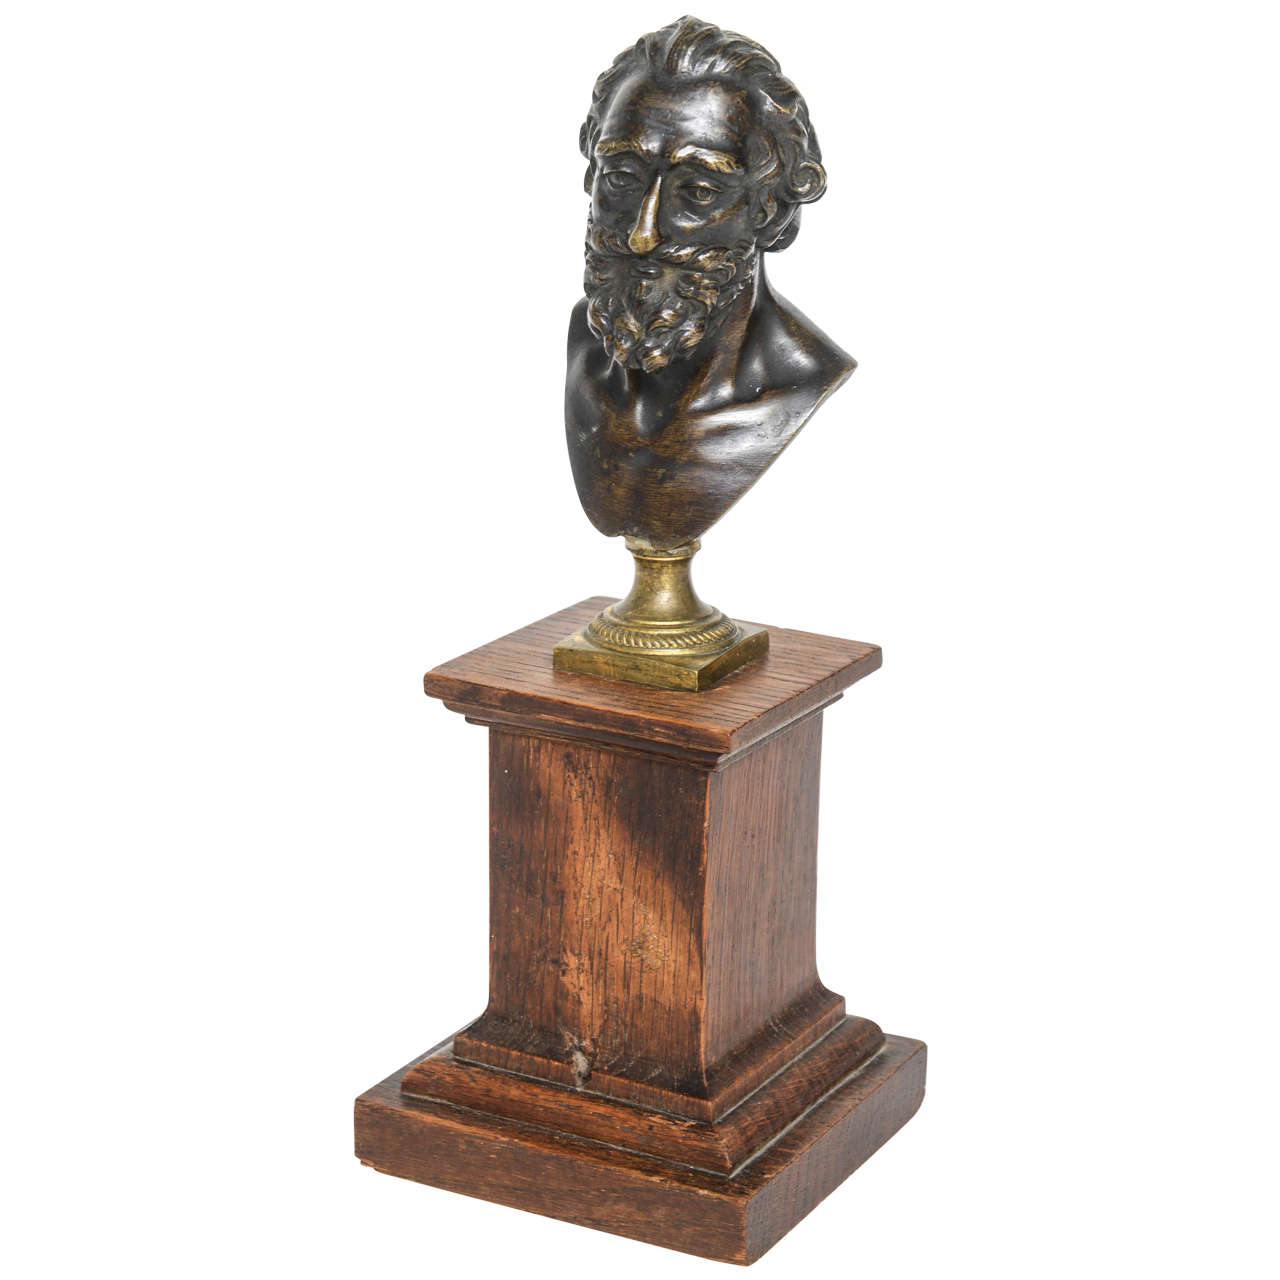 Rare Bronze Portrait Bust of Henri IV after Model by Barthelemy Prieur, c. 1800